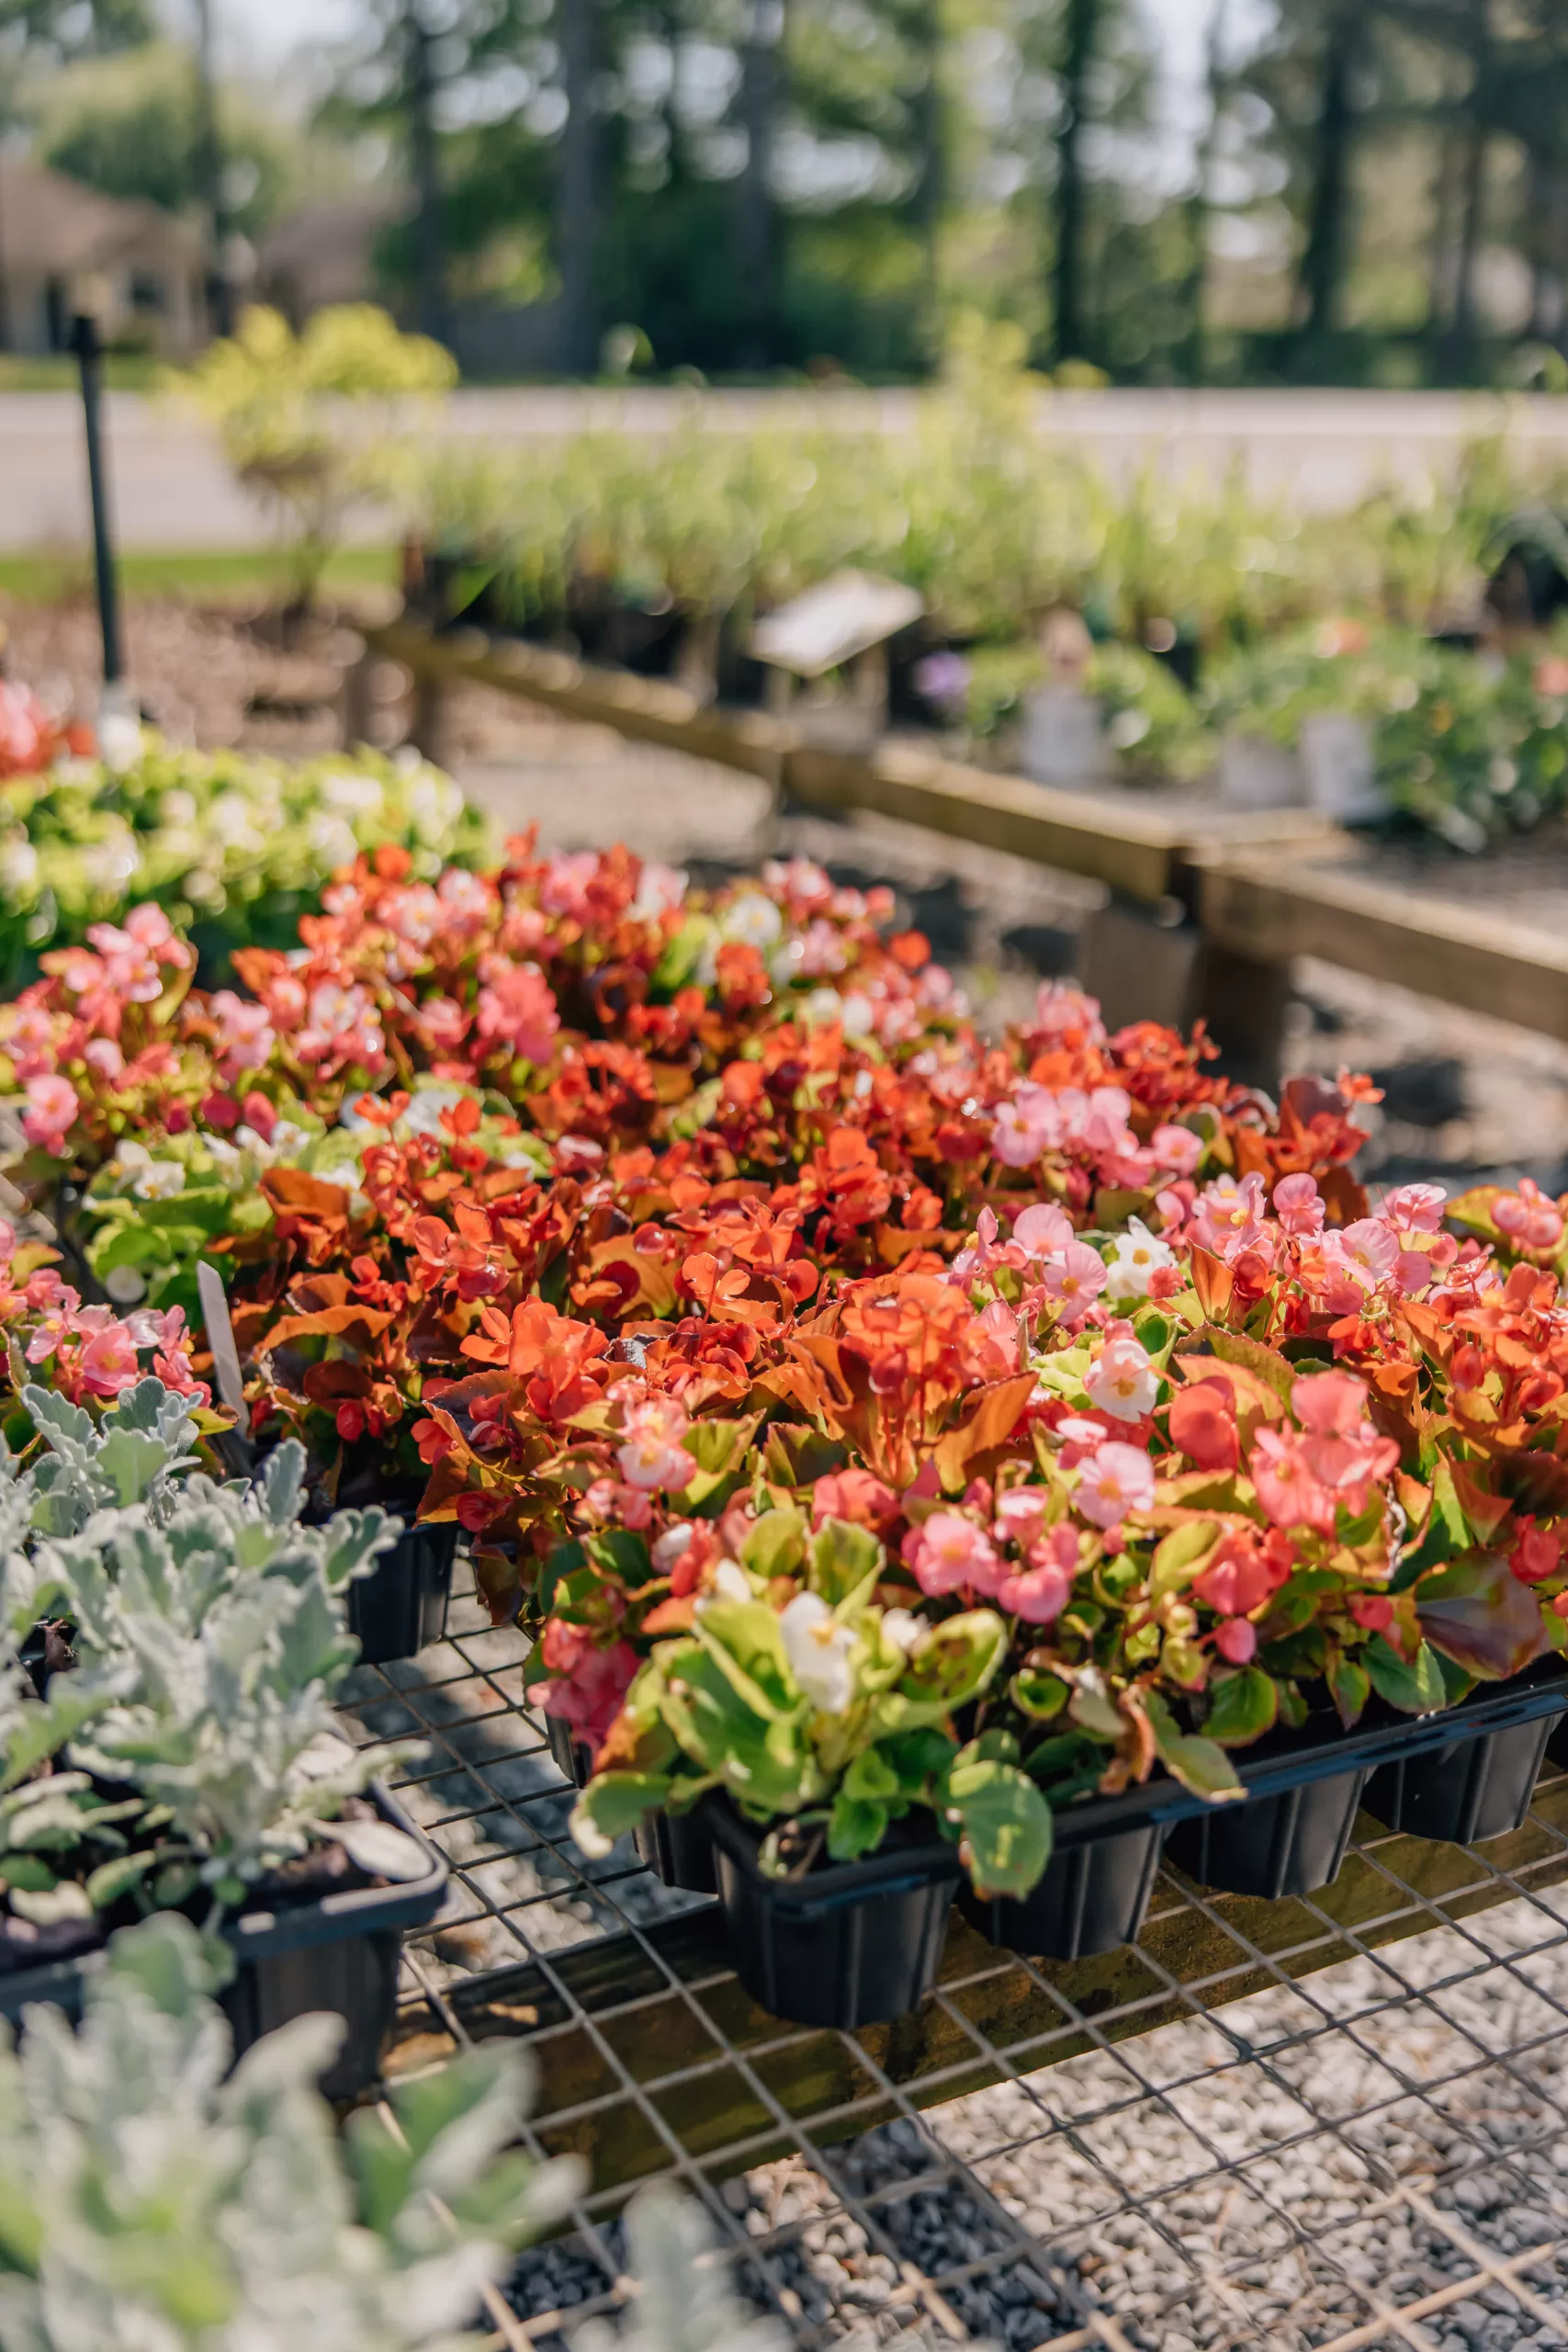 Indian Creek Wholesale Nursery in Madison: If you're looking to make changes to your landscaping and work towards creating your own outdoor summer retreat, read on to learn more about summertime planting from the experts at Indian Creek Wholesale Nursery in Madison.